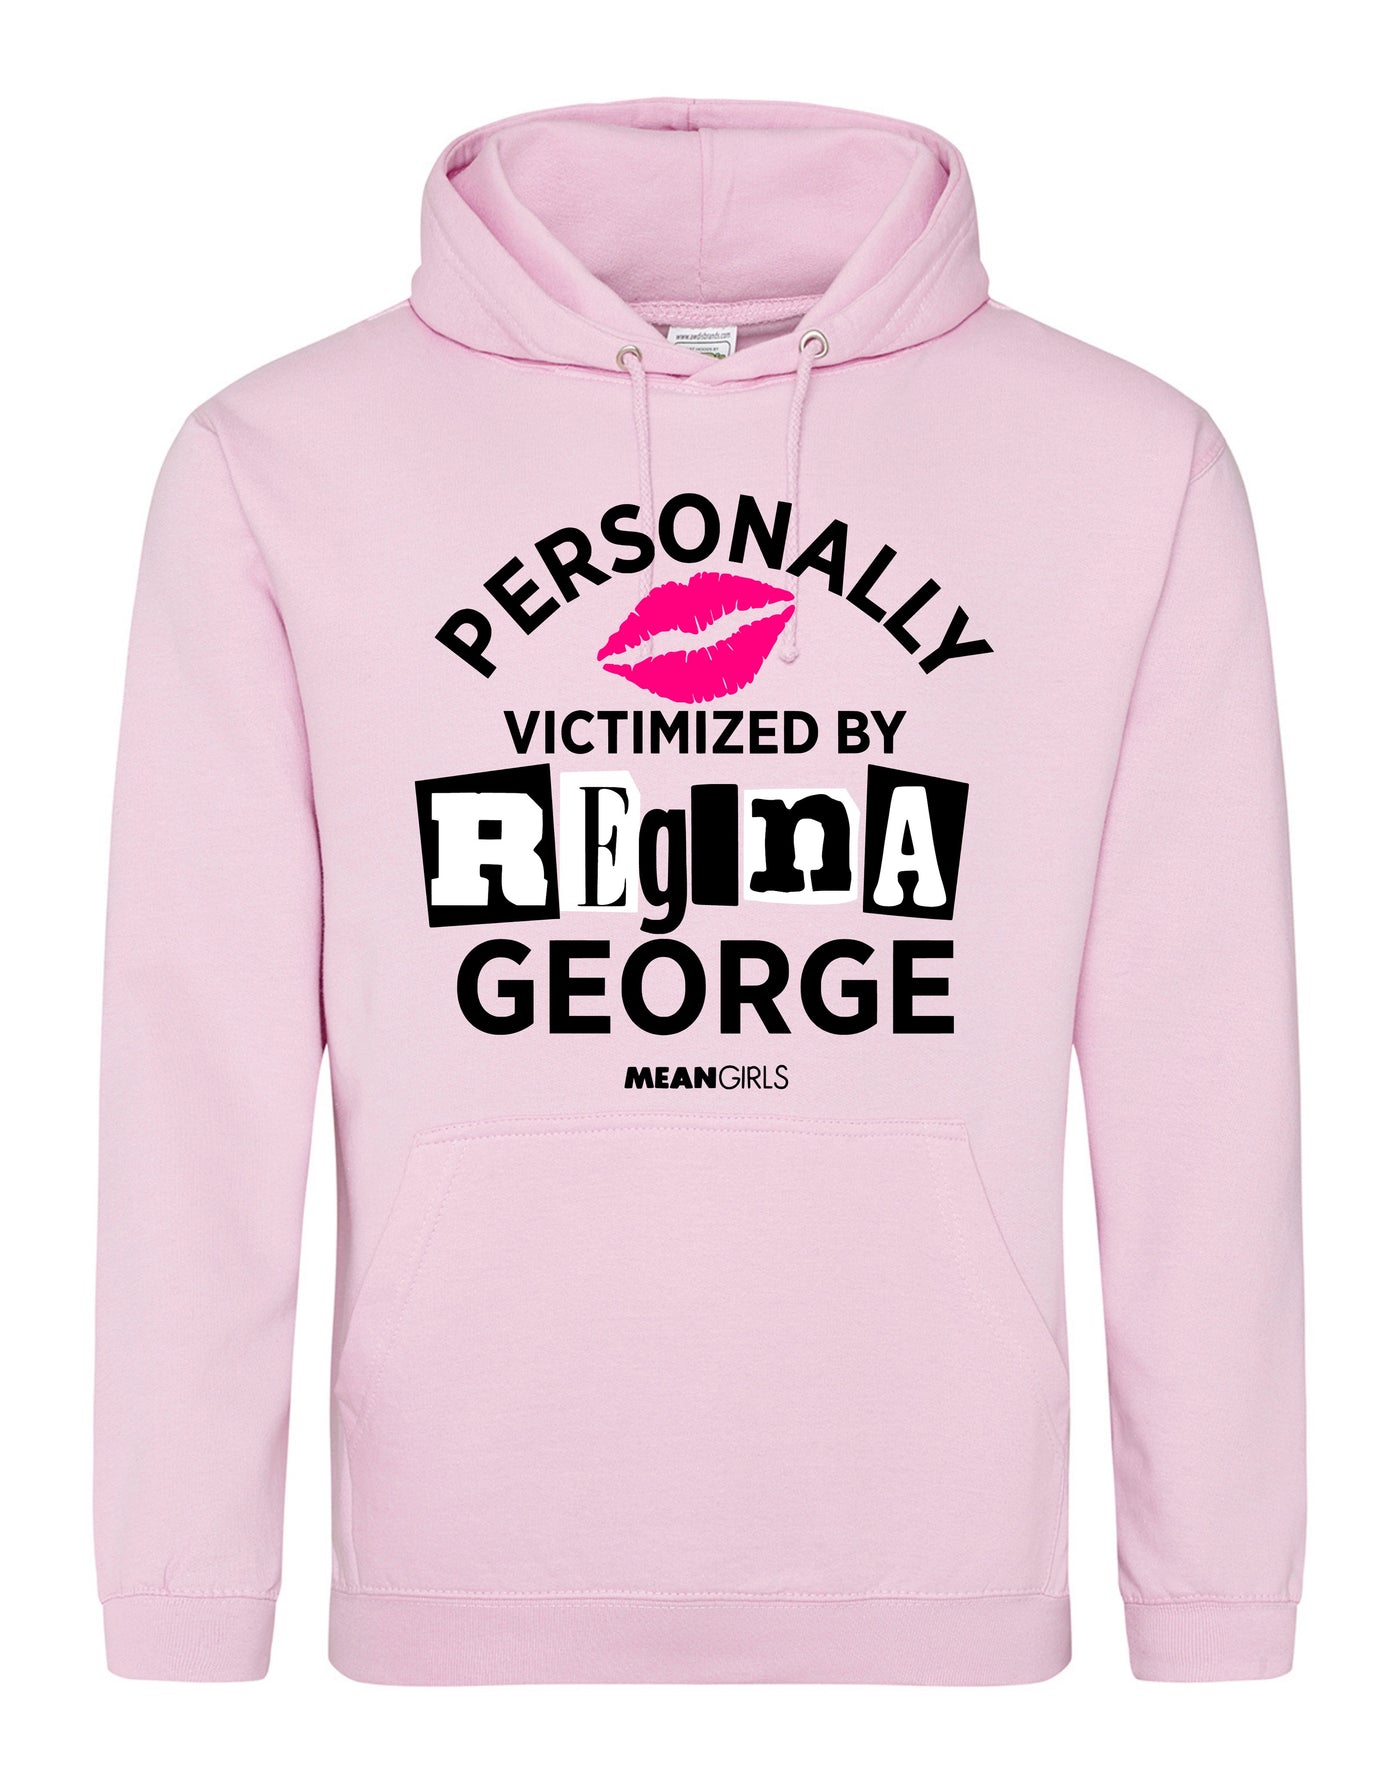 "Personally Victimized" Standard Hoodie